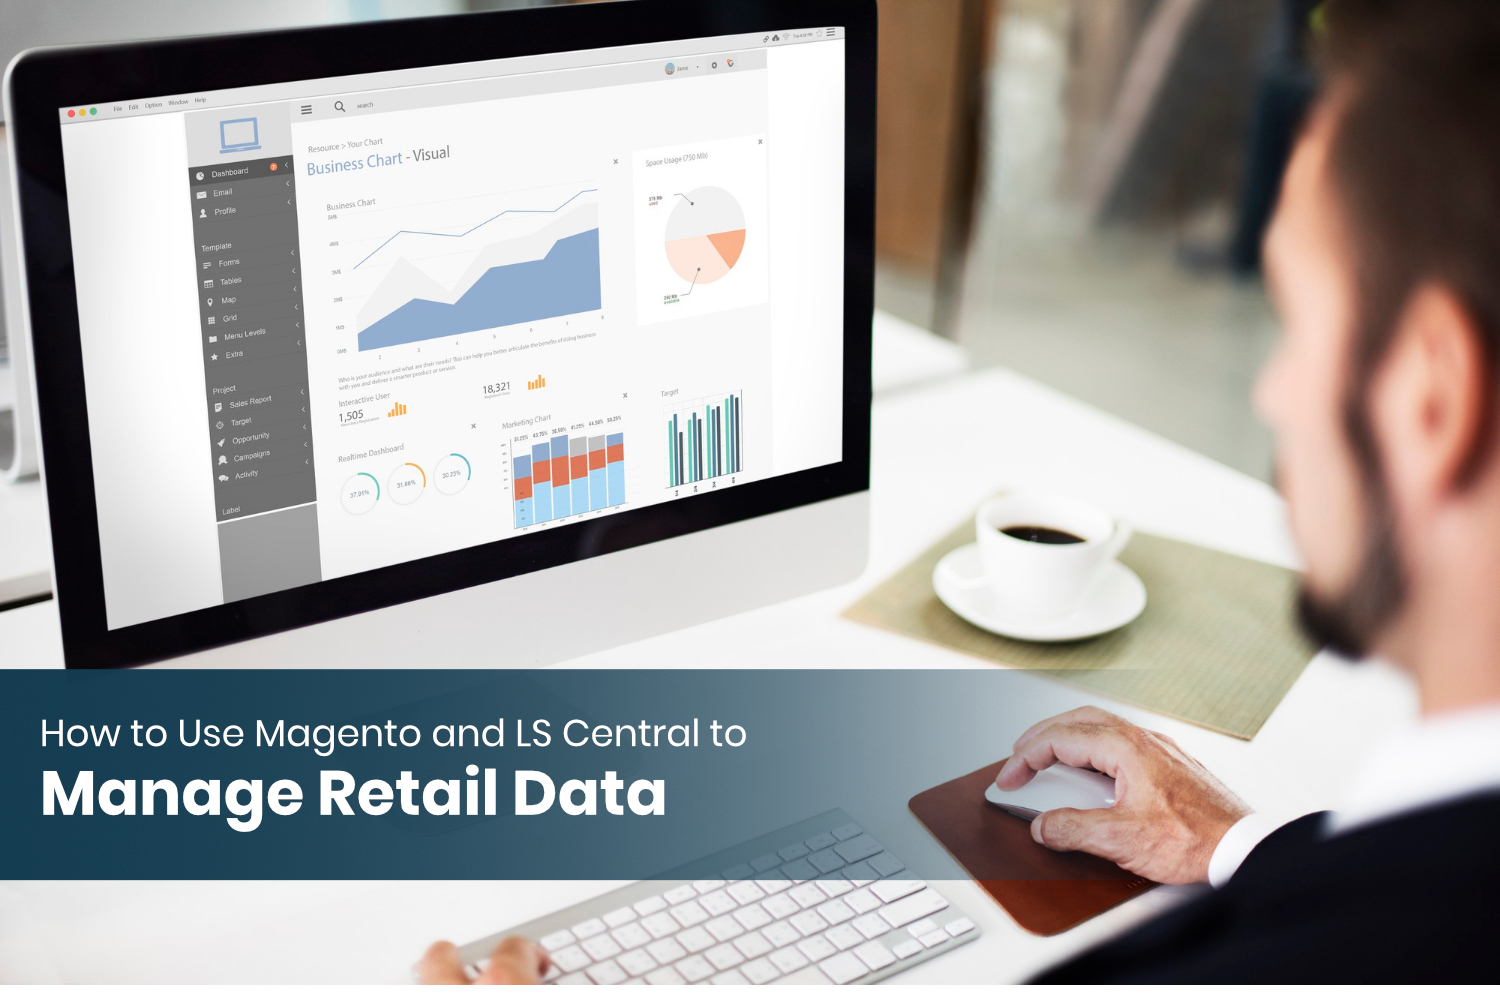 How to Use Magento and LS Central to Manage Retail Data